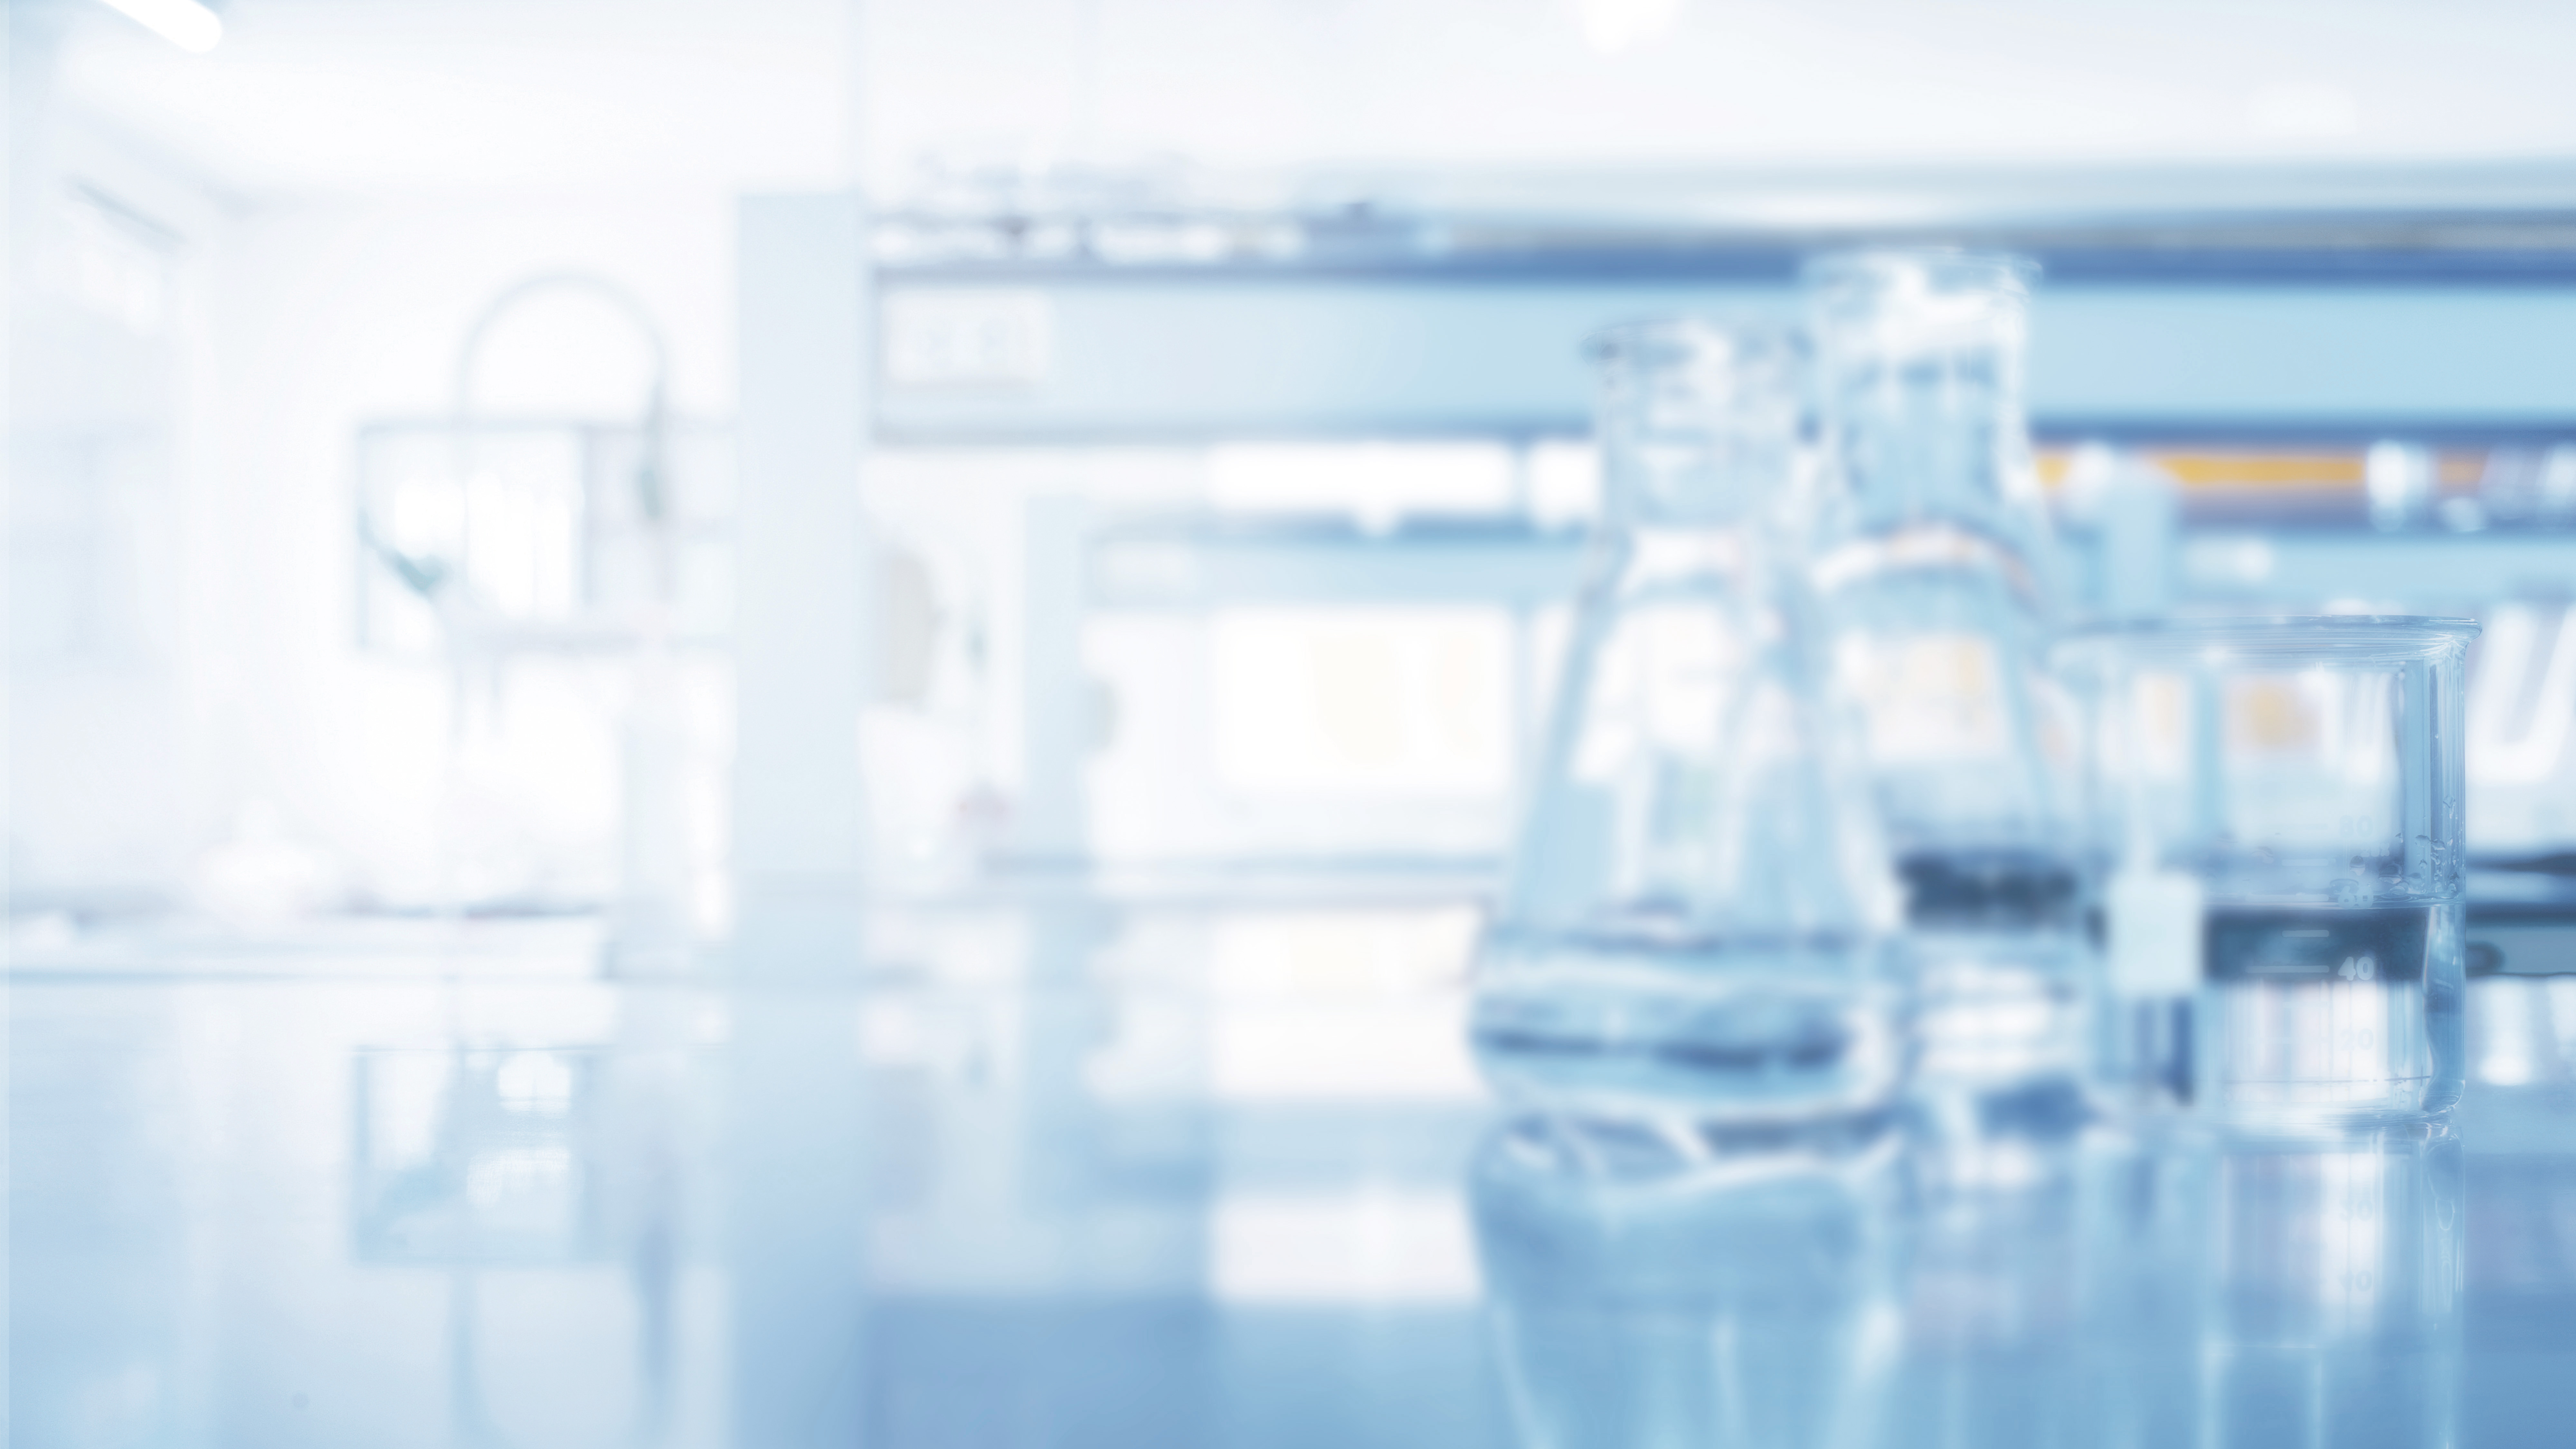 Outsourcing, Scale up and Technology Transfer in Biopharma and Pharma Industry